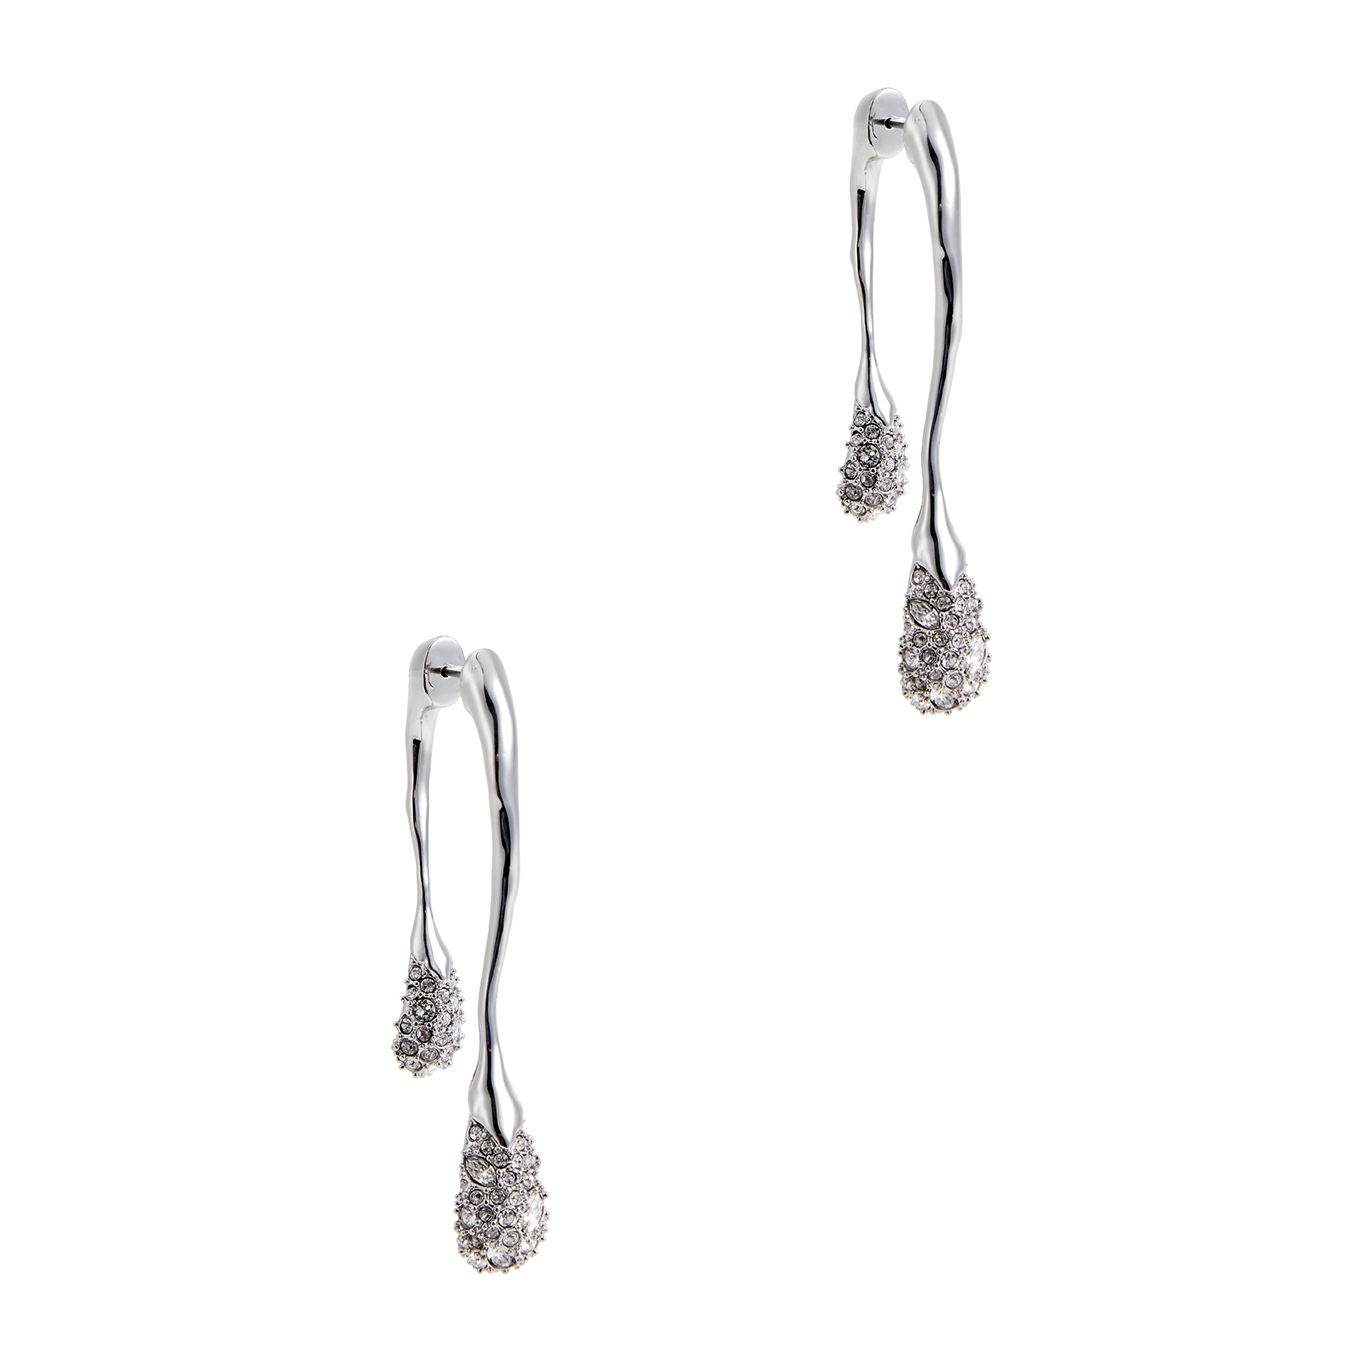 ALEXIS BITTAR ALEXIS BITTAR SOLANALES EMBELLISHED DOUBLE DROP EARRINGS